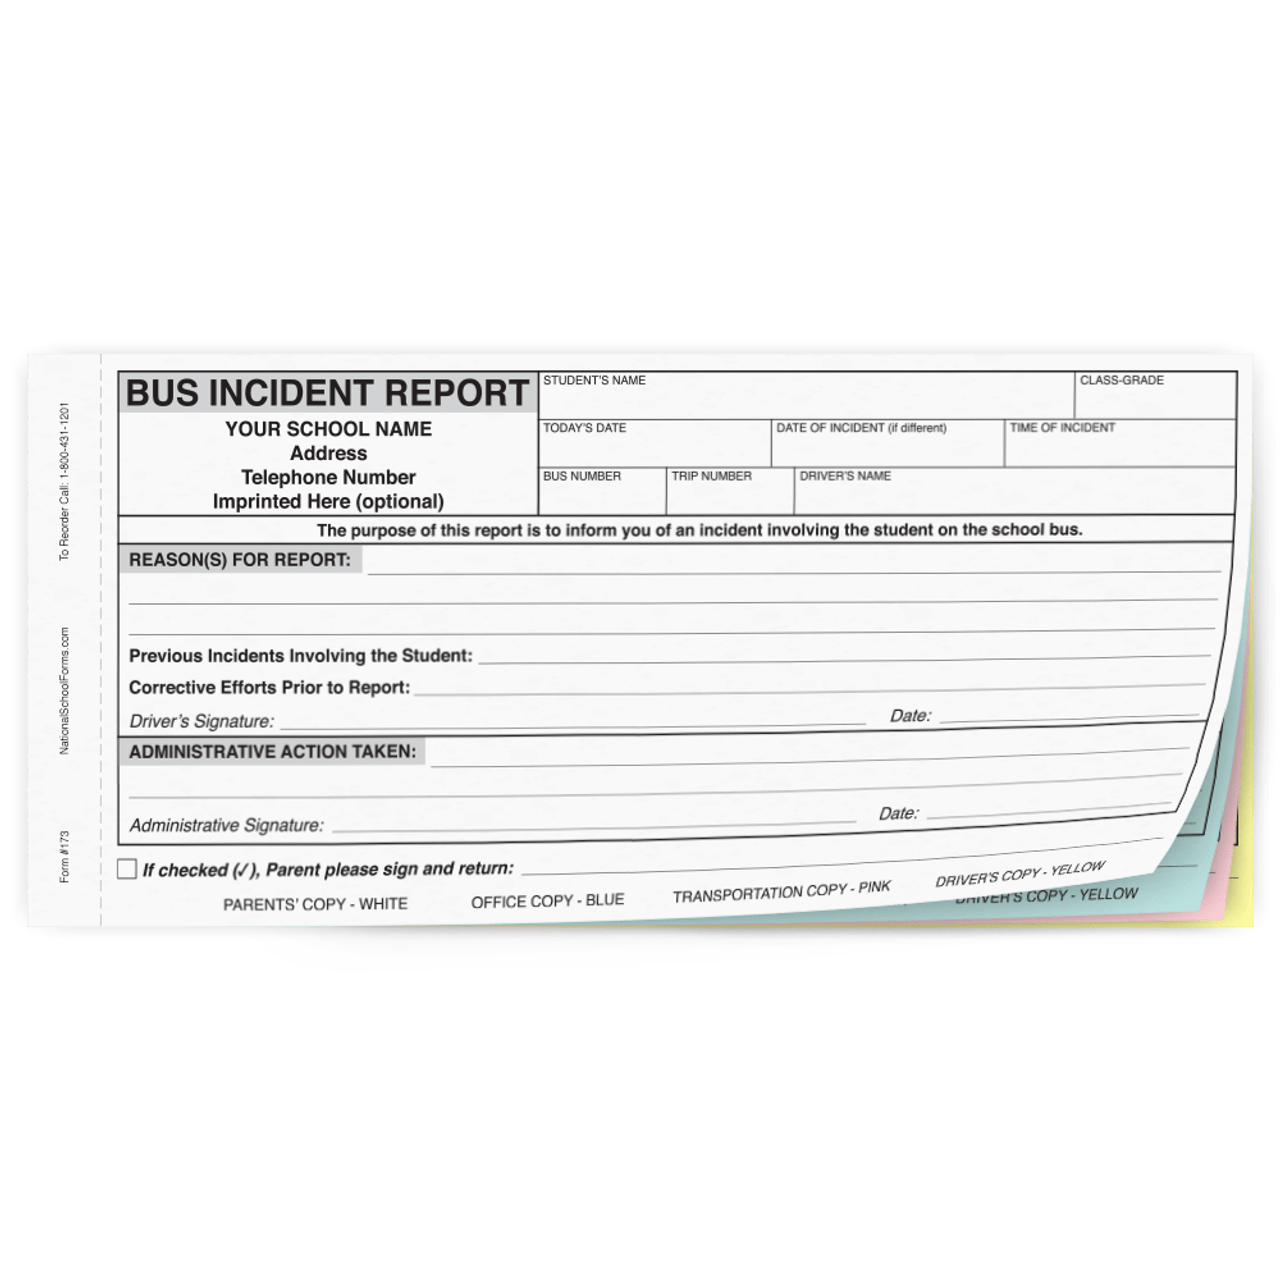 Bus Incident Report (173) - 4 part carbonless form with optional Imprint